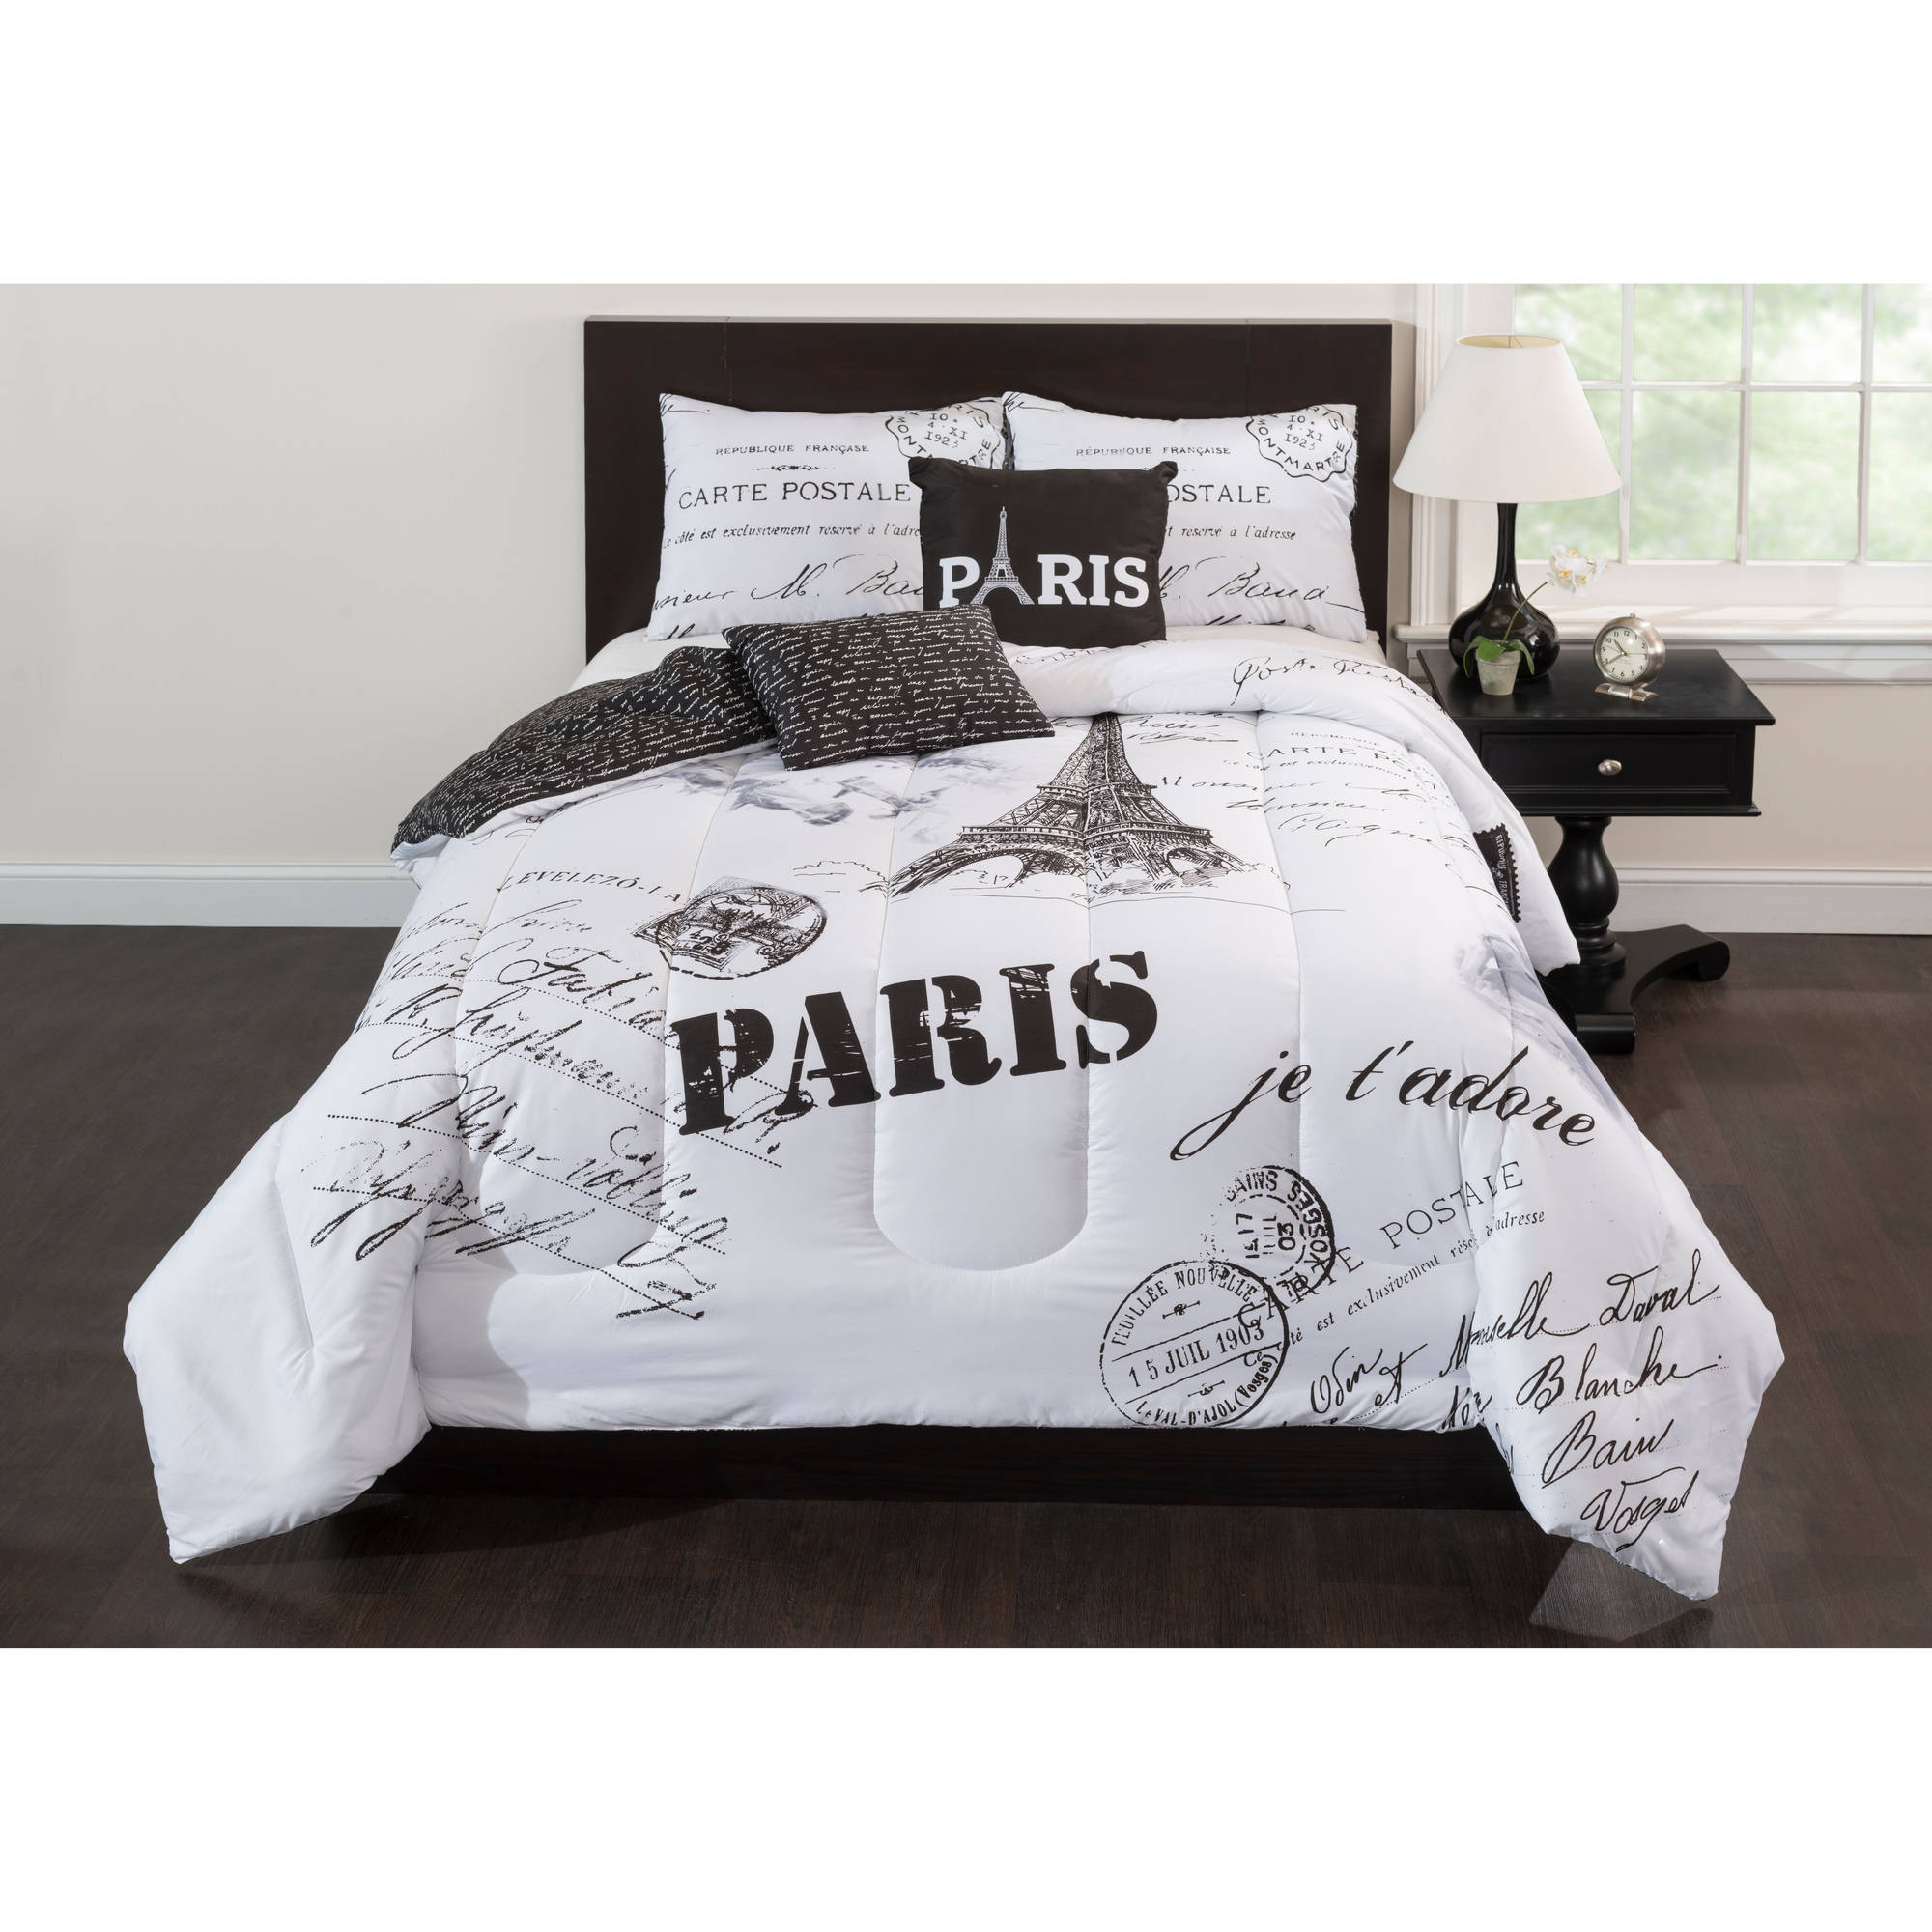 Feels Like Paris Bedding Sets And Accessories Collections Starting pertaining to size 2000 X 2000